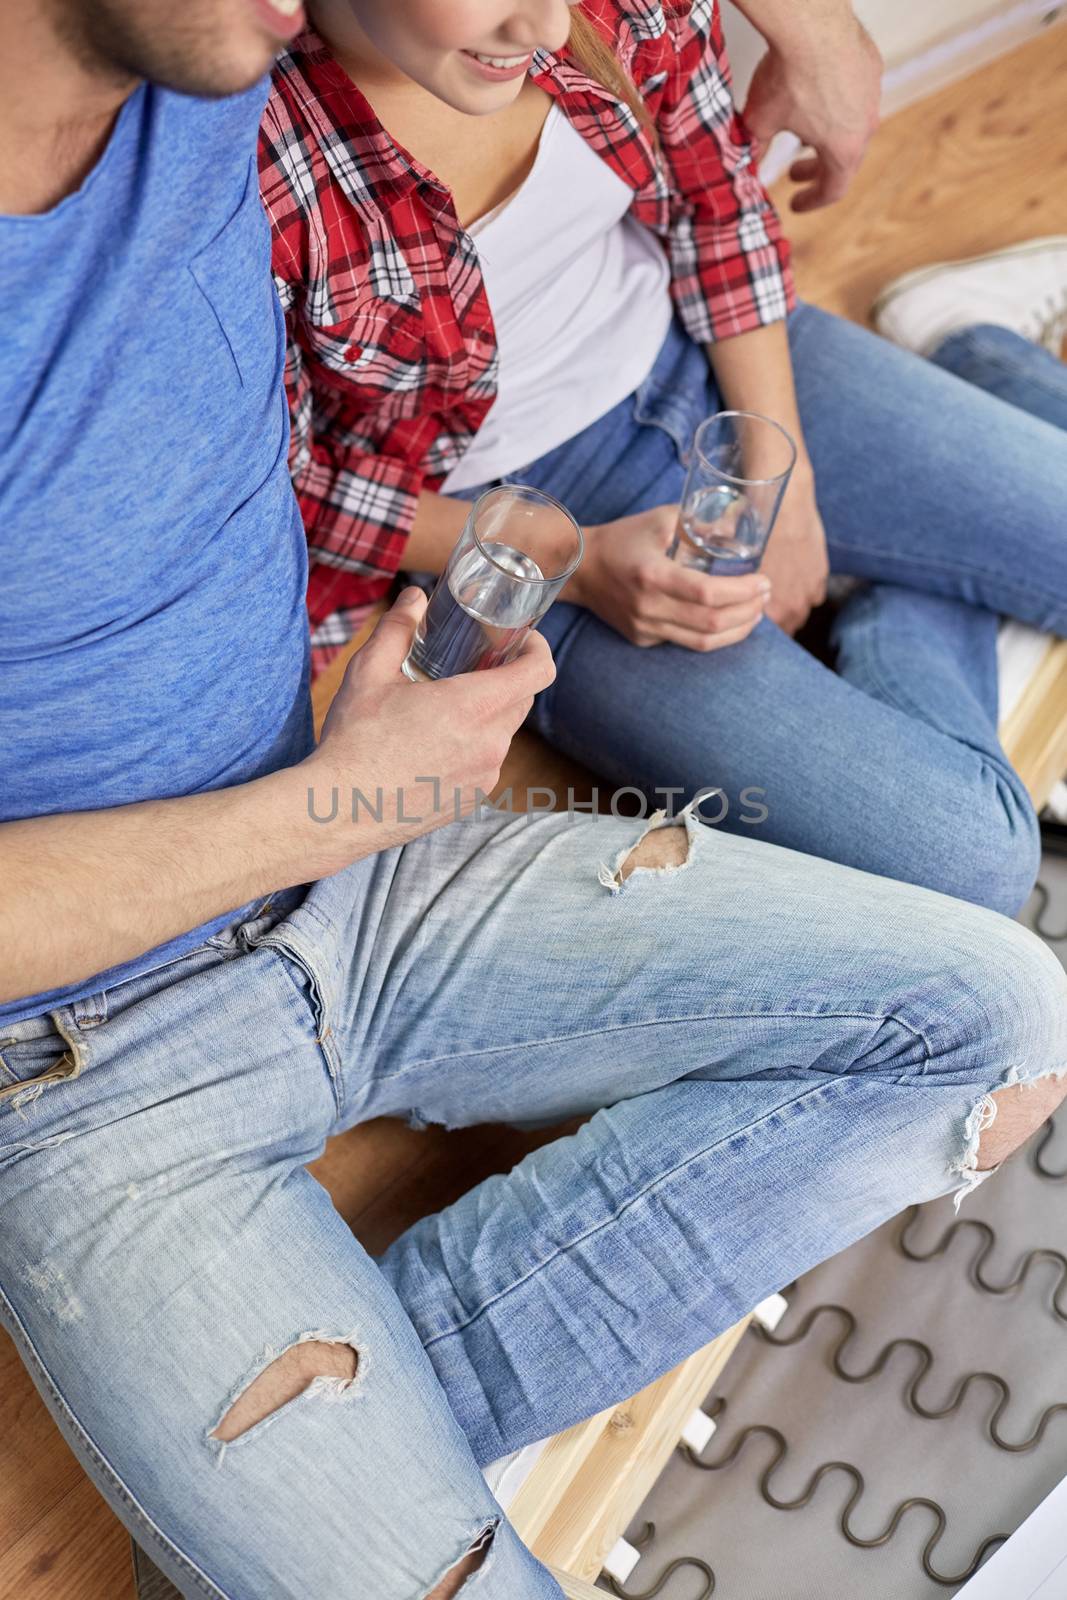 moving, home, repair and people concept - close up of couple legs relaxing and and drinking water from glasses in new apartment